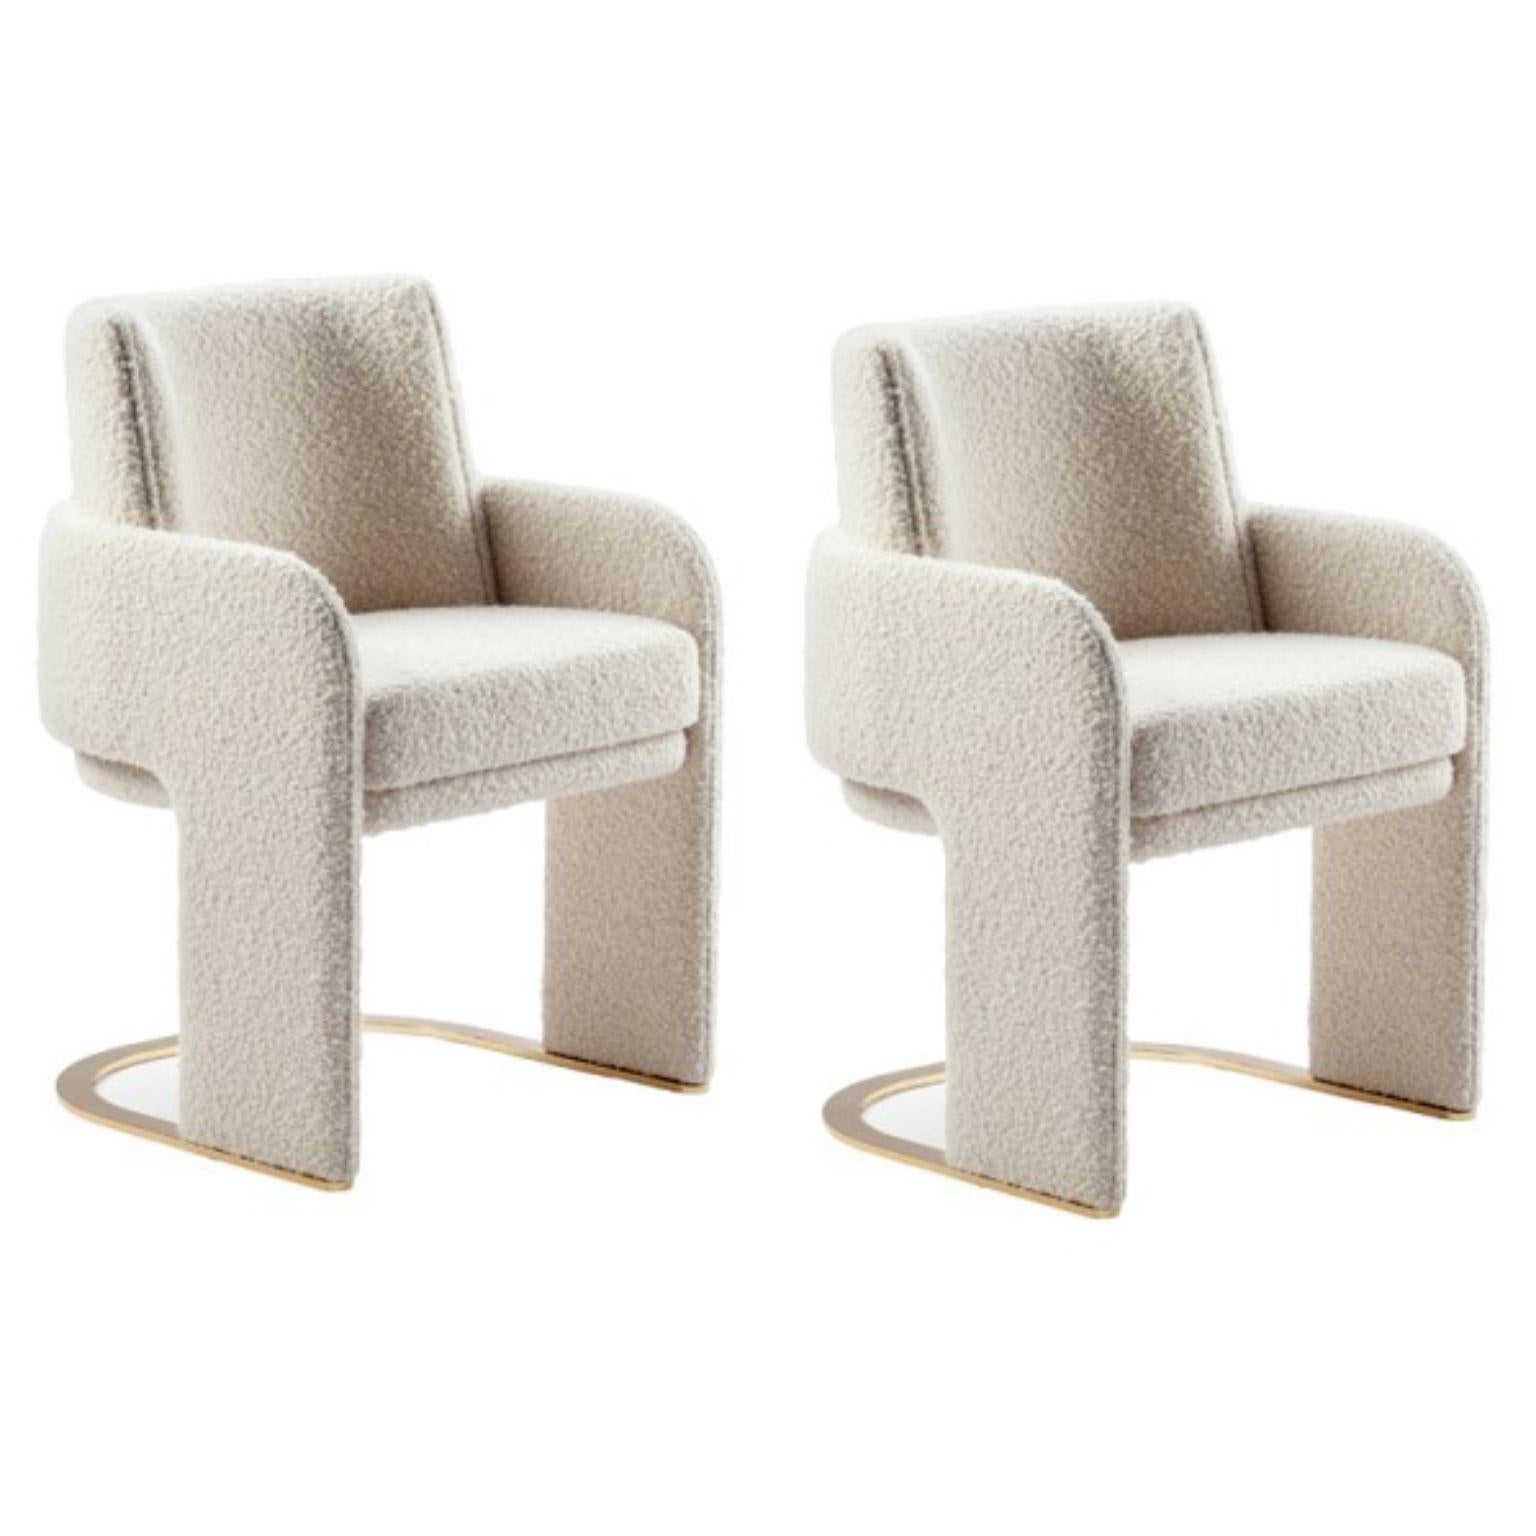 Set of 2 Bouclé Odisseia Chairs by Dooq
Dimensions
W 54 x D 55 x H 85 x Seat H 48 cm

Materials & Finishes
Base and feet in stainless steel plated polished or satin: brass, copper or nickel. Upholstery: seat, armrests and back fully upholstered